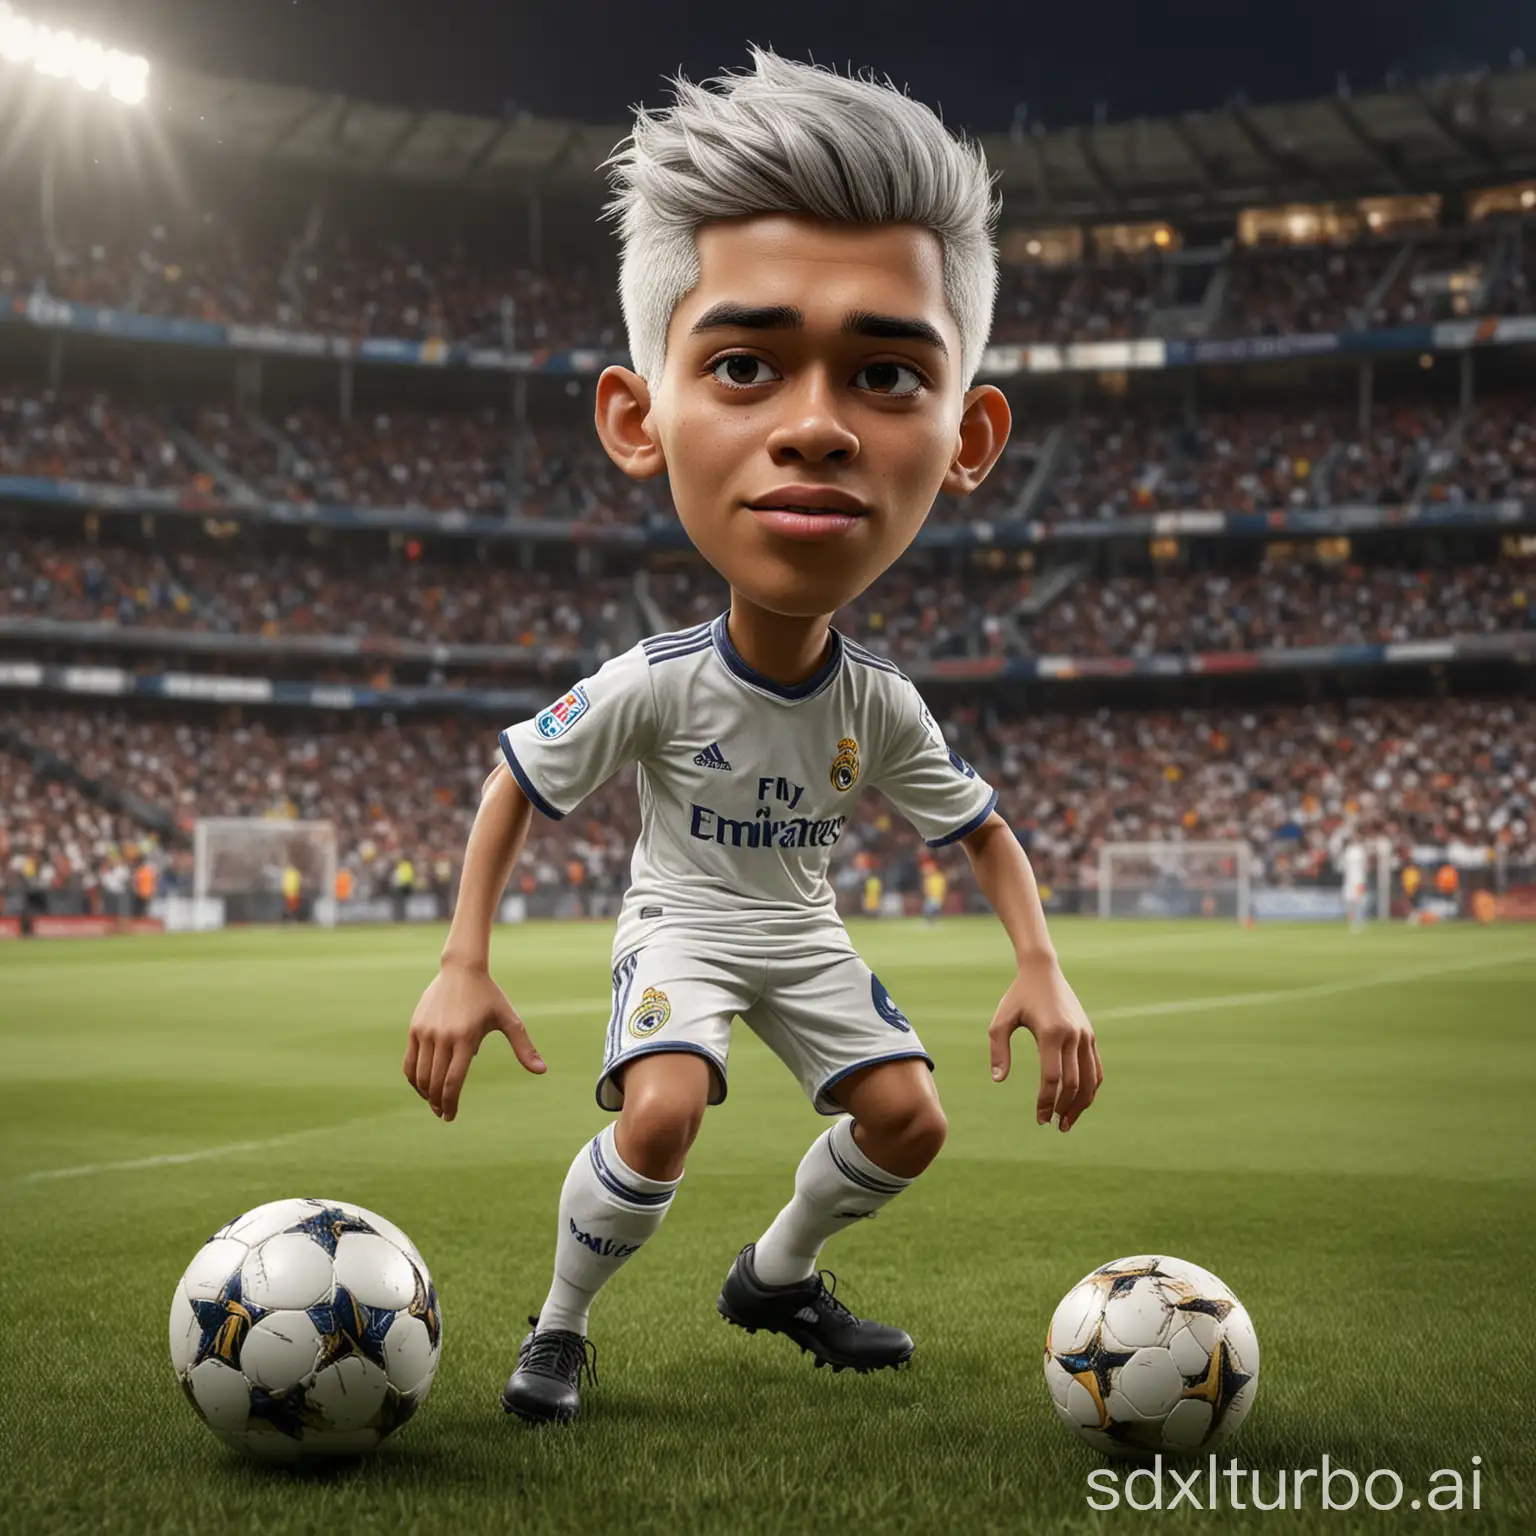 Indonesian-Teenage-Soccer-Player-Kicking-Ball-in-Real-Madrid-Jersey-at-Magnificent-Stadium